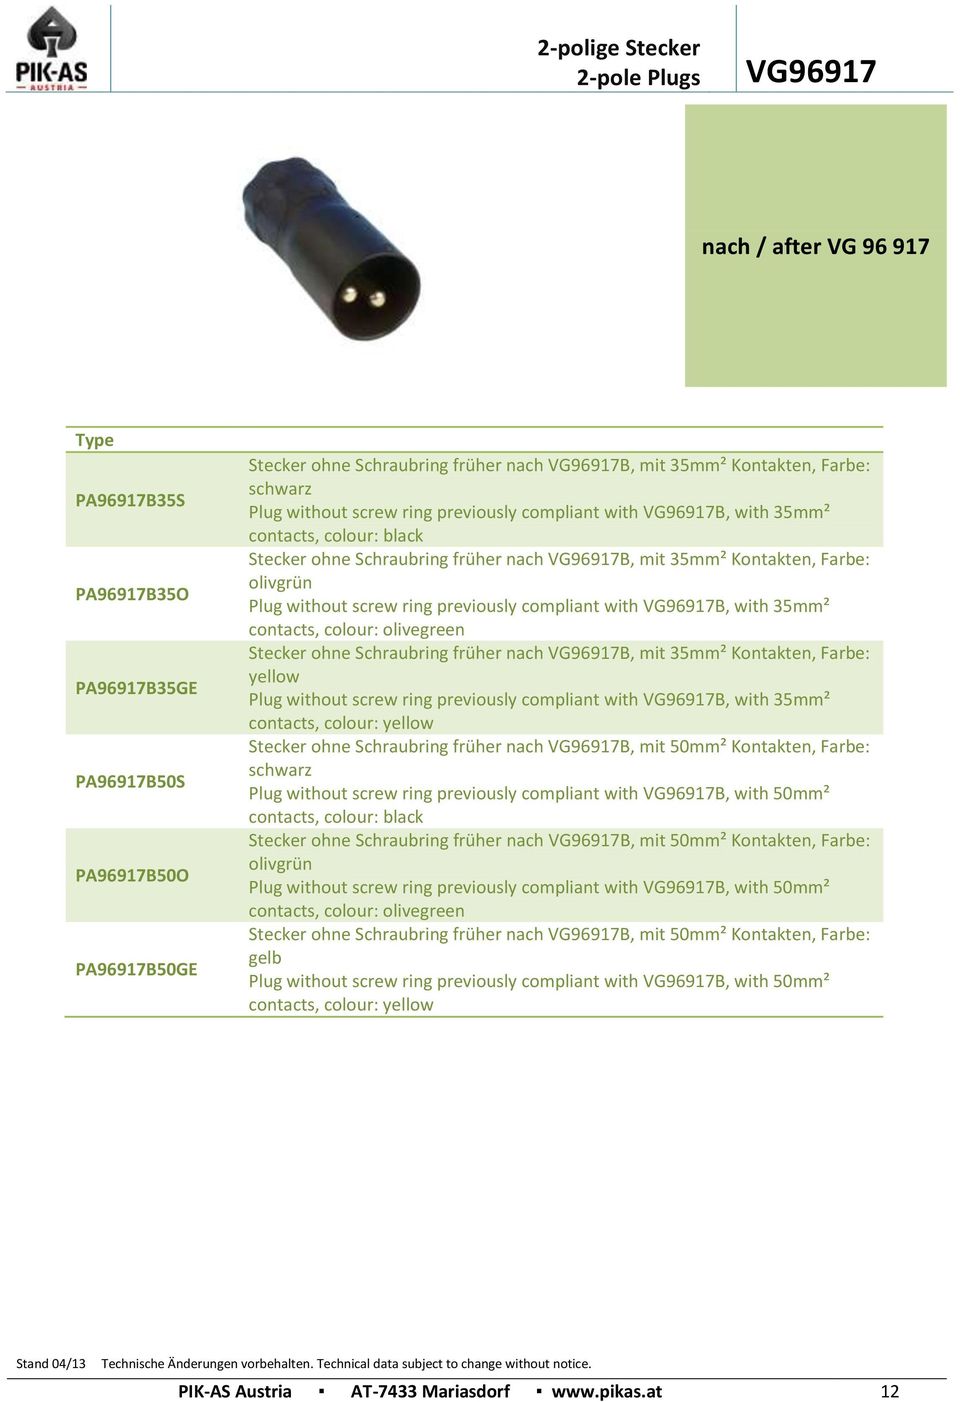 olivgrün Plug without screw ring previously compliant with VG96917B, with 35mm² contacts, colour: olivegreen Stecker ohne Schraubring früher nach VG96917B, mit 35mm² Kontakten, Farbe: yellow Plug